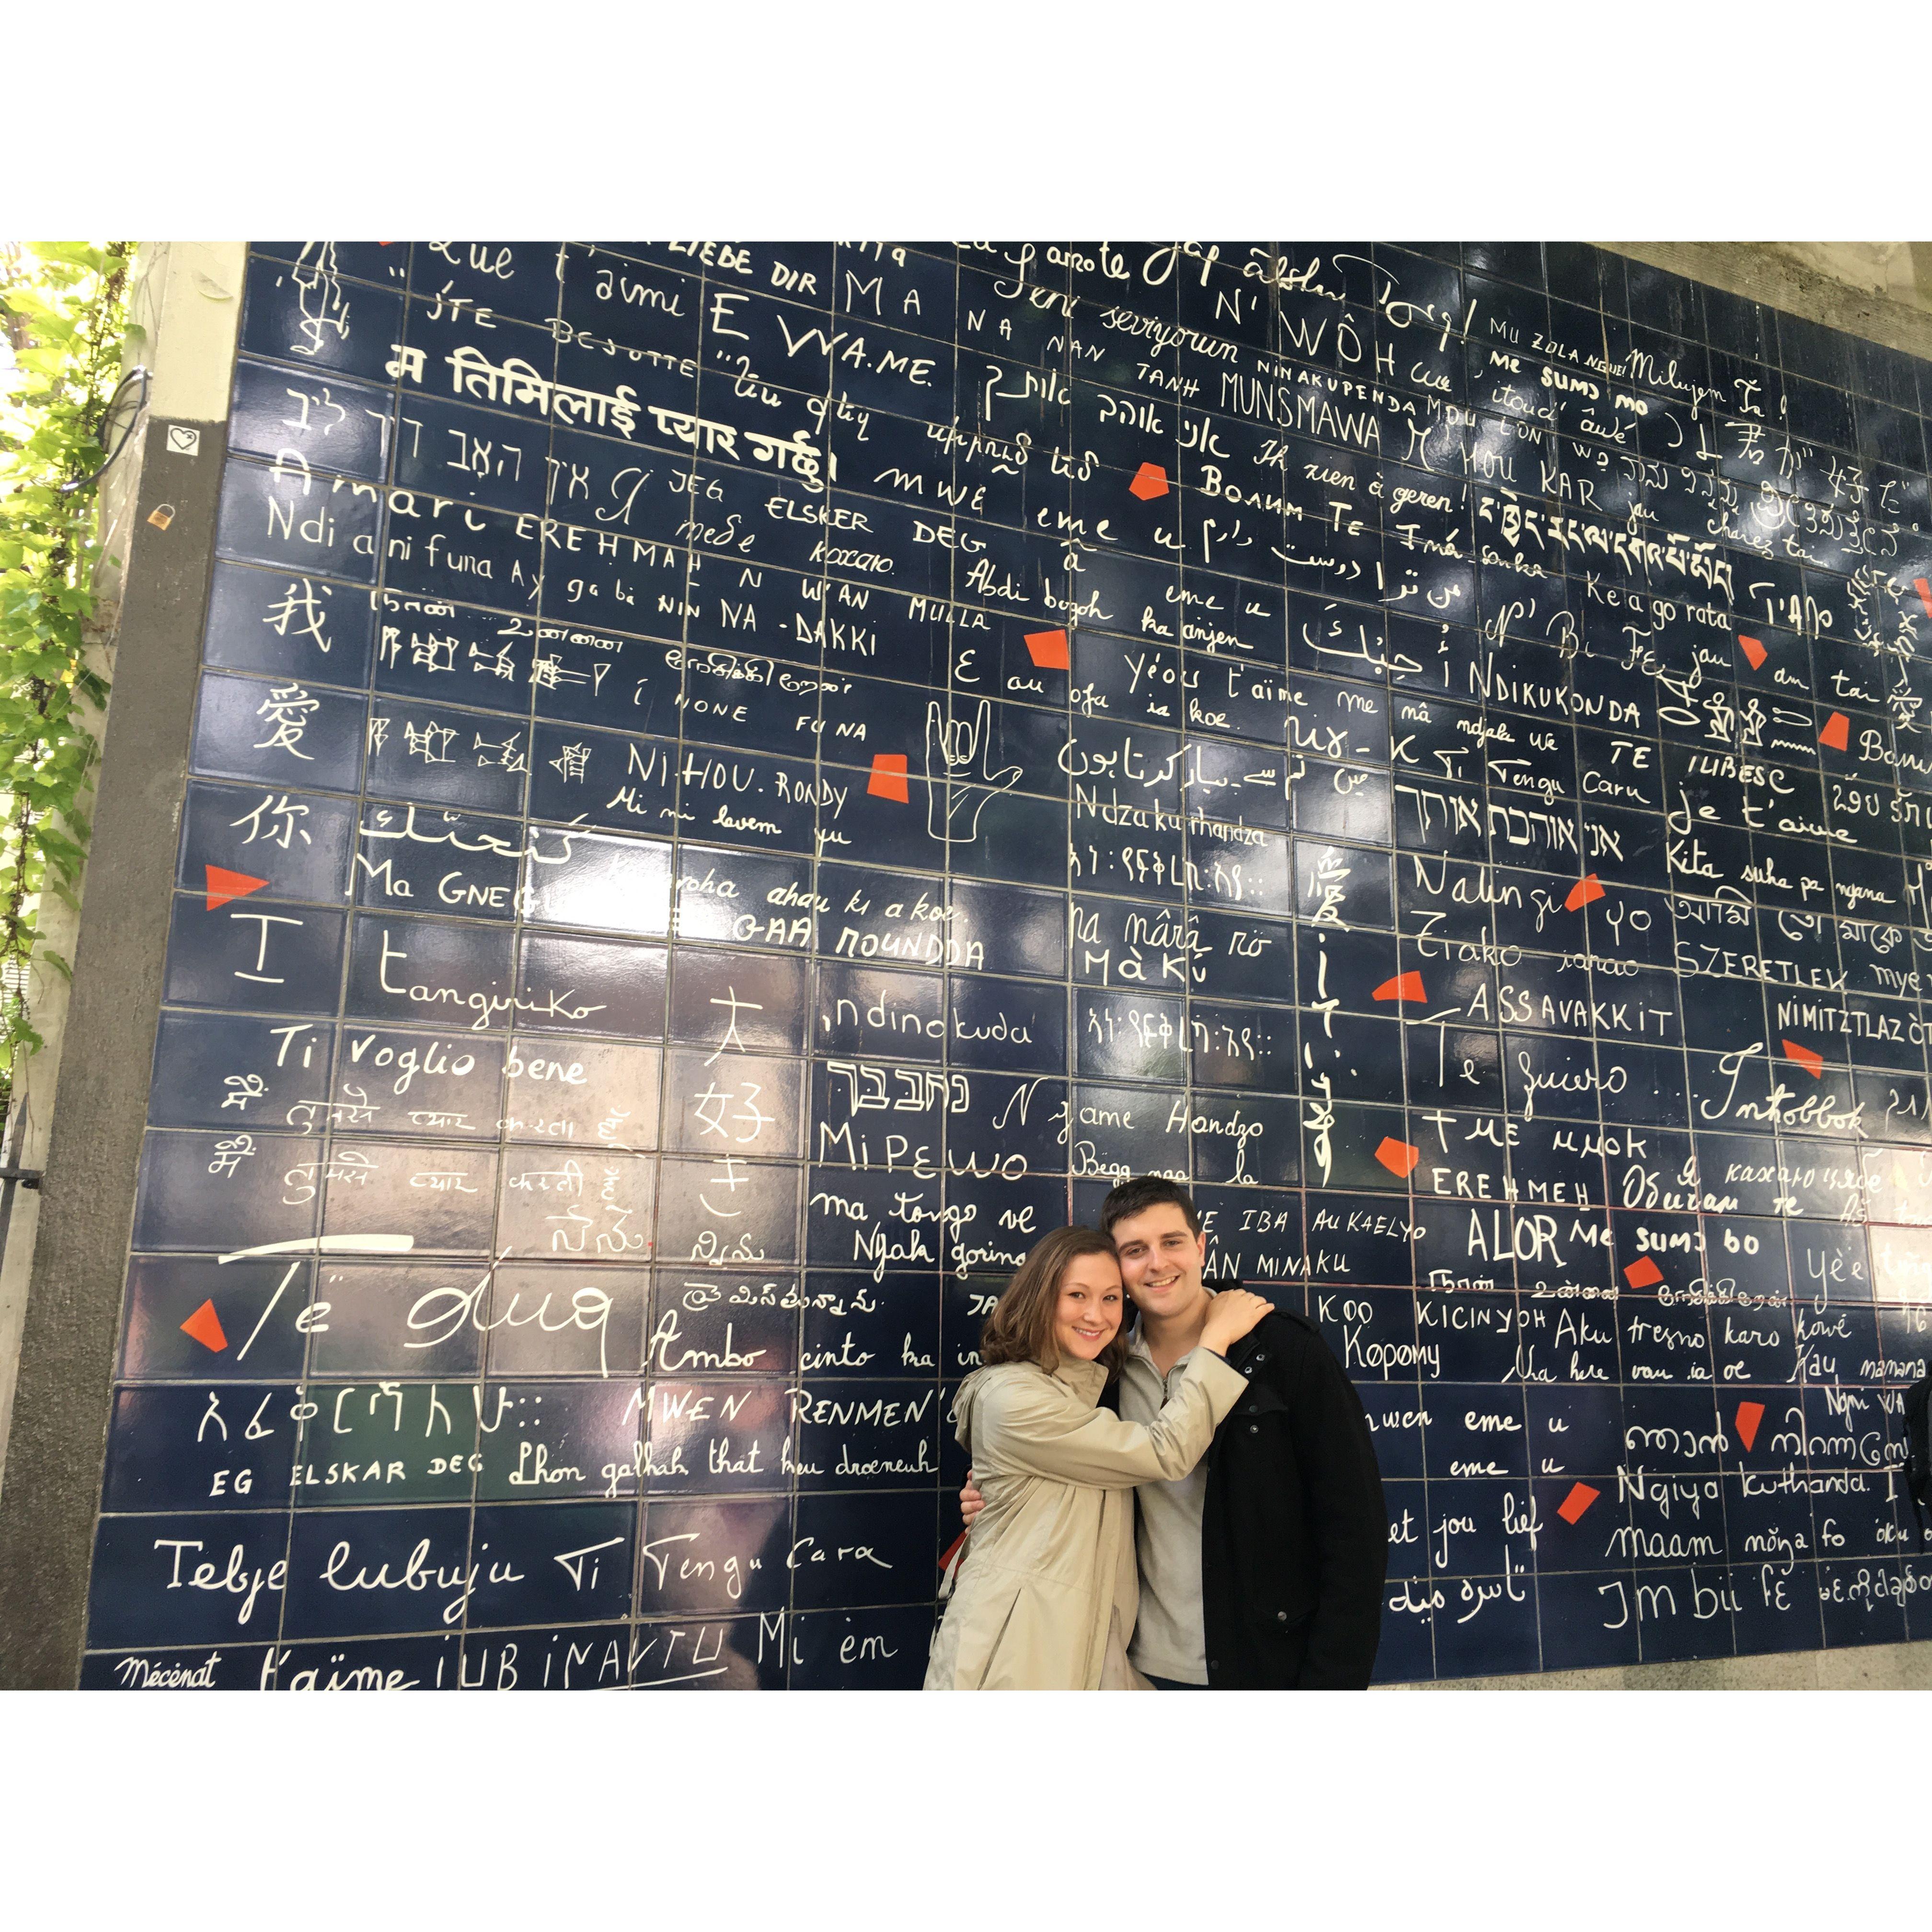 The Wall of Love in Montmartre, Paris, France.